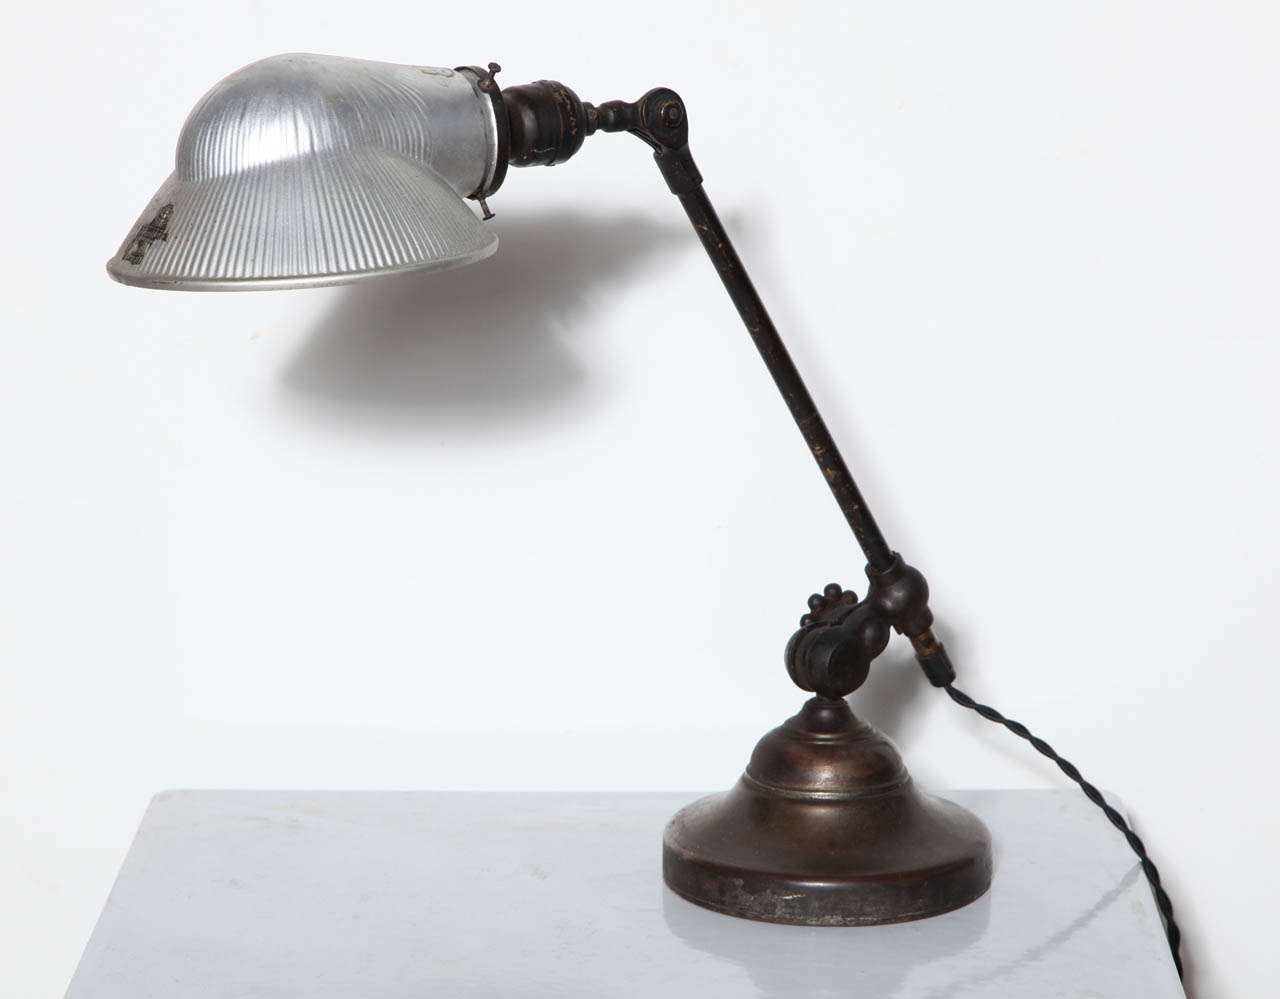 O. C. White Brass & Iron Adjustable Table Lamp with Mercury Glass Shade, C. 1900 For Sale 3